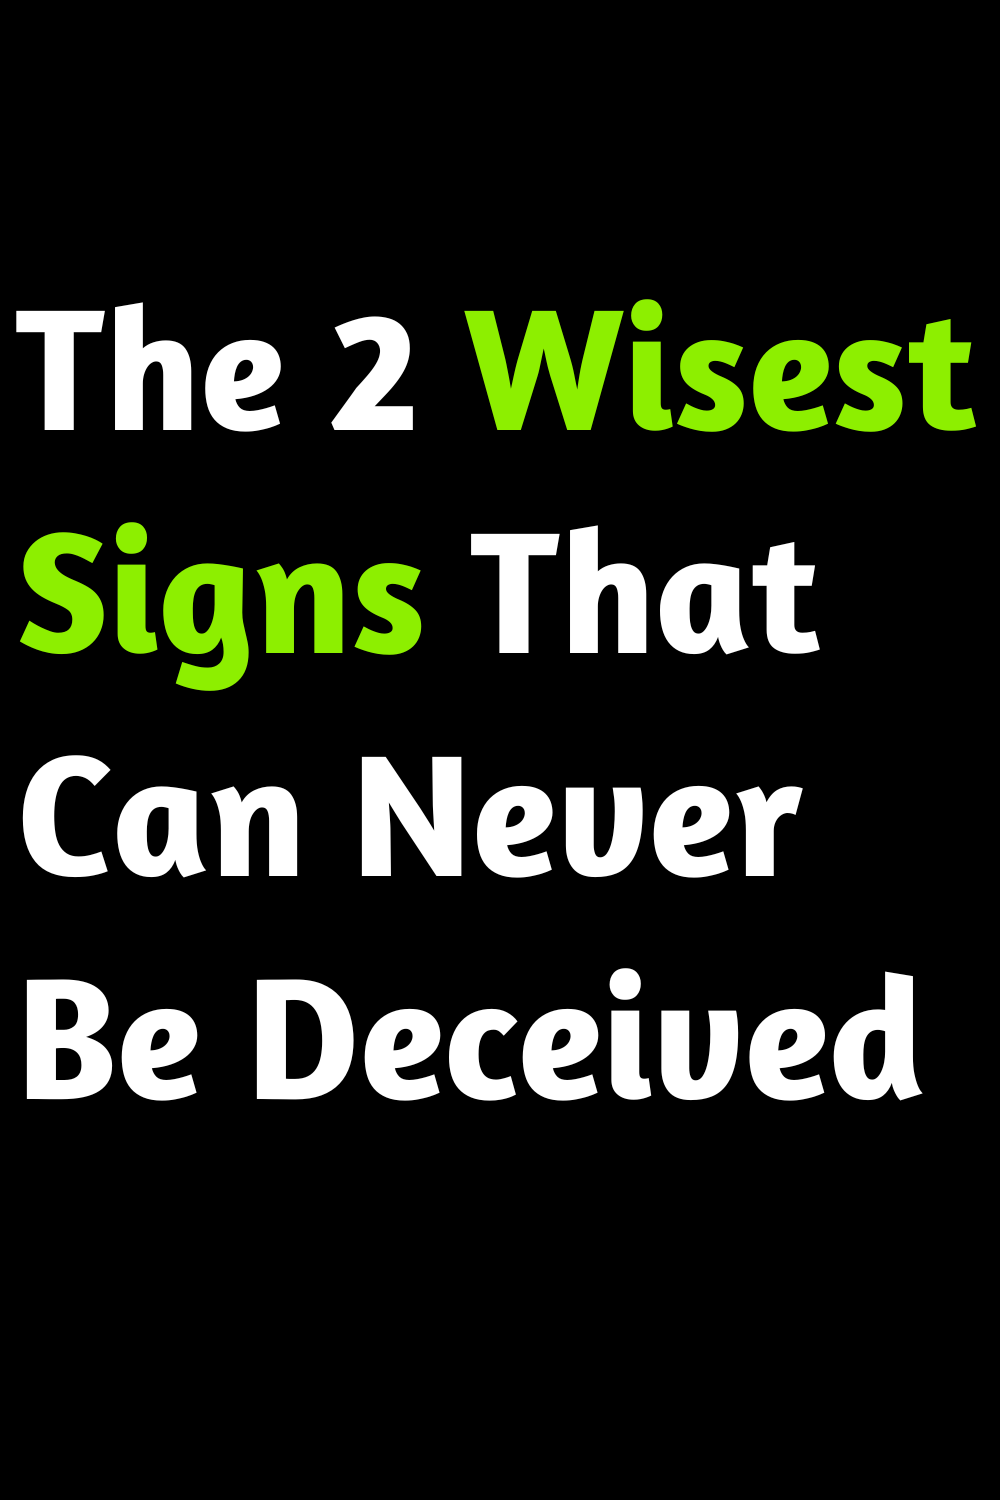 The 2 Wisest Signs That Can Never Be Deceived